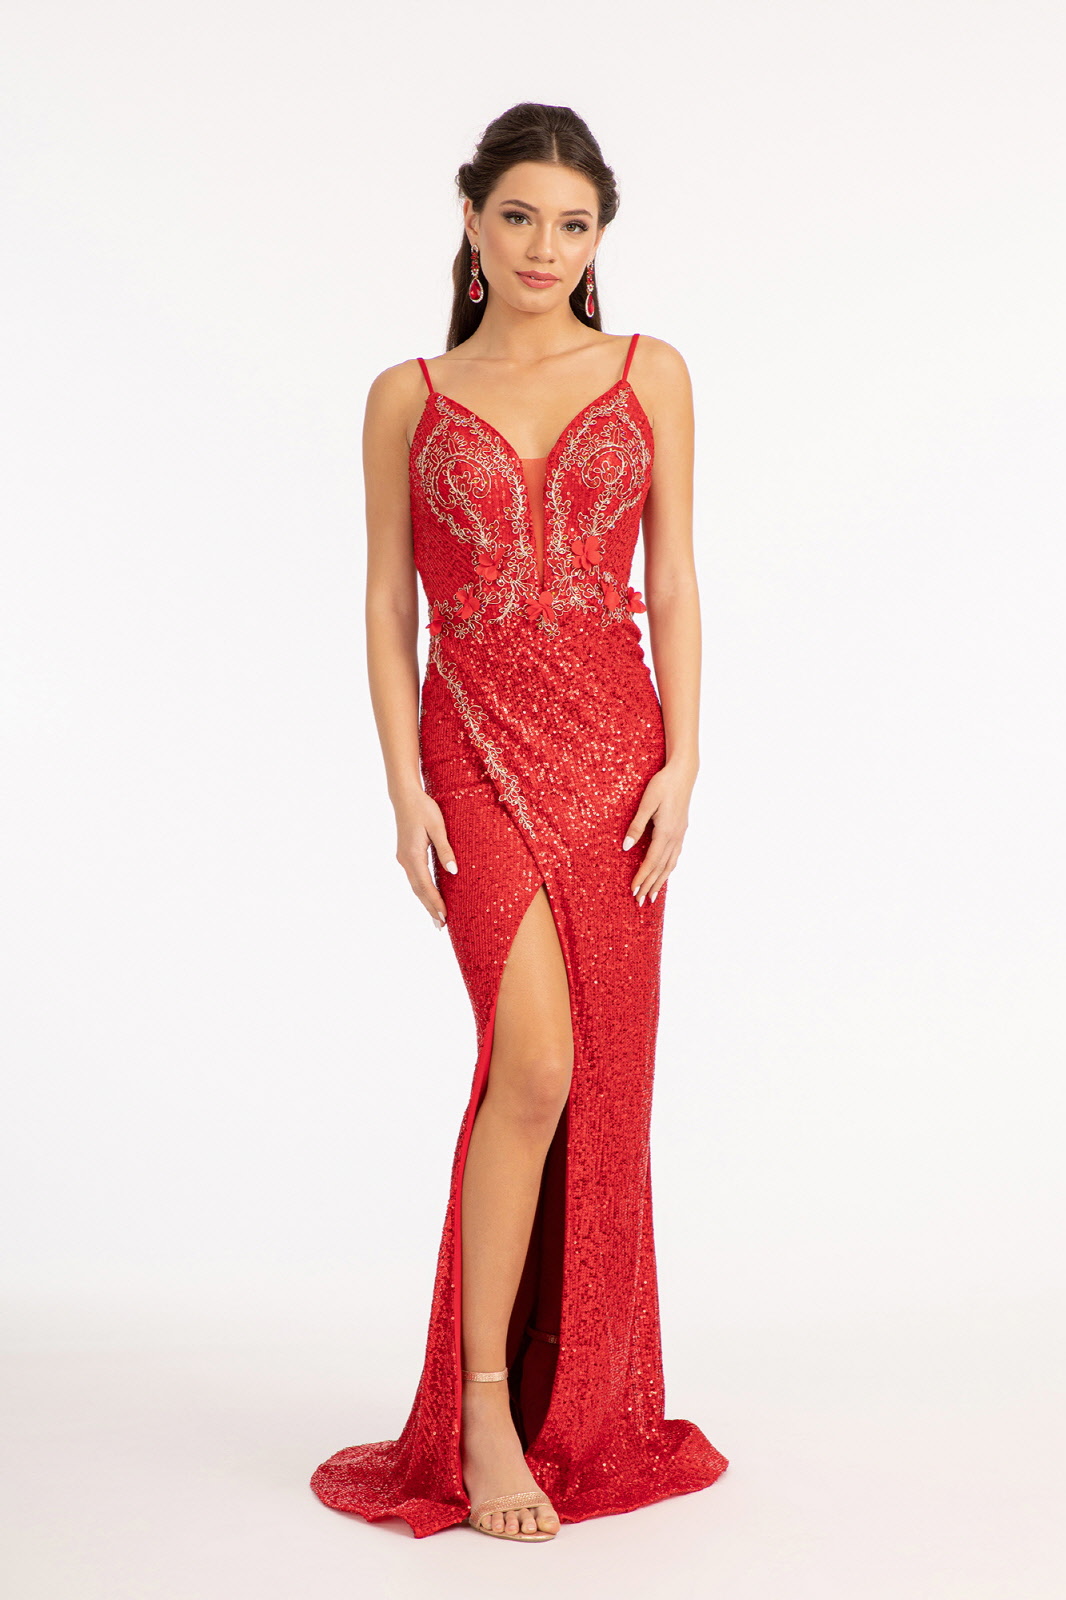 Avianna Red Mermaid V Neck Backless Sequined Lace Prom Dress with Slit